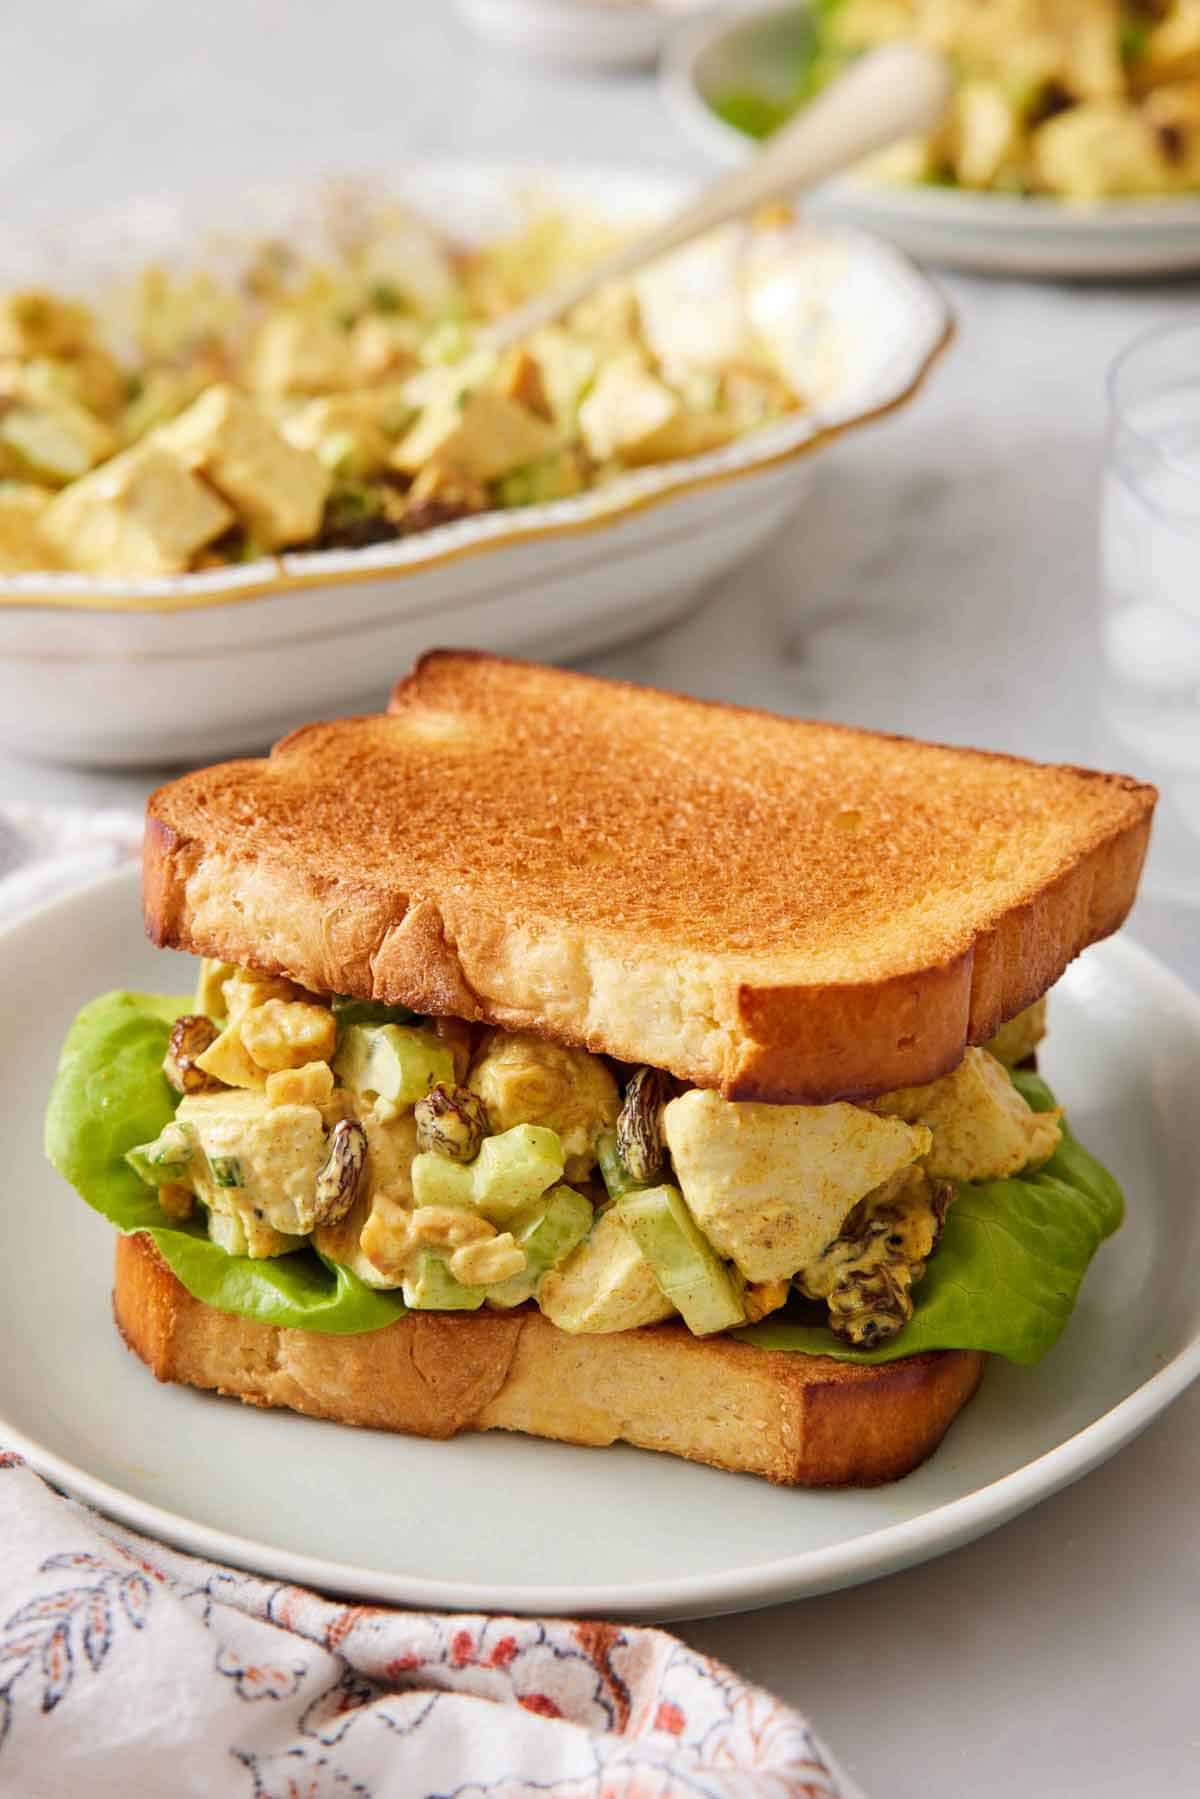 A plate with curried chicken salad on lettuce between two toasted pieces of bread. A platter of curried chicken salad in the back.